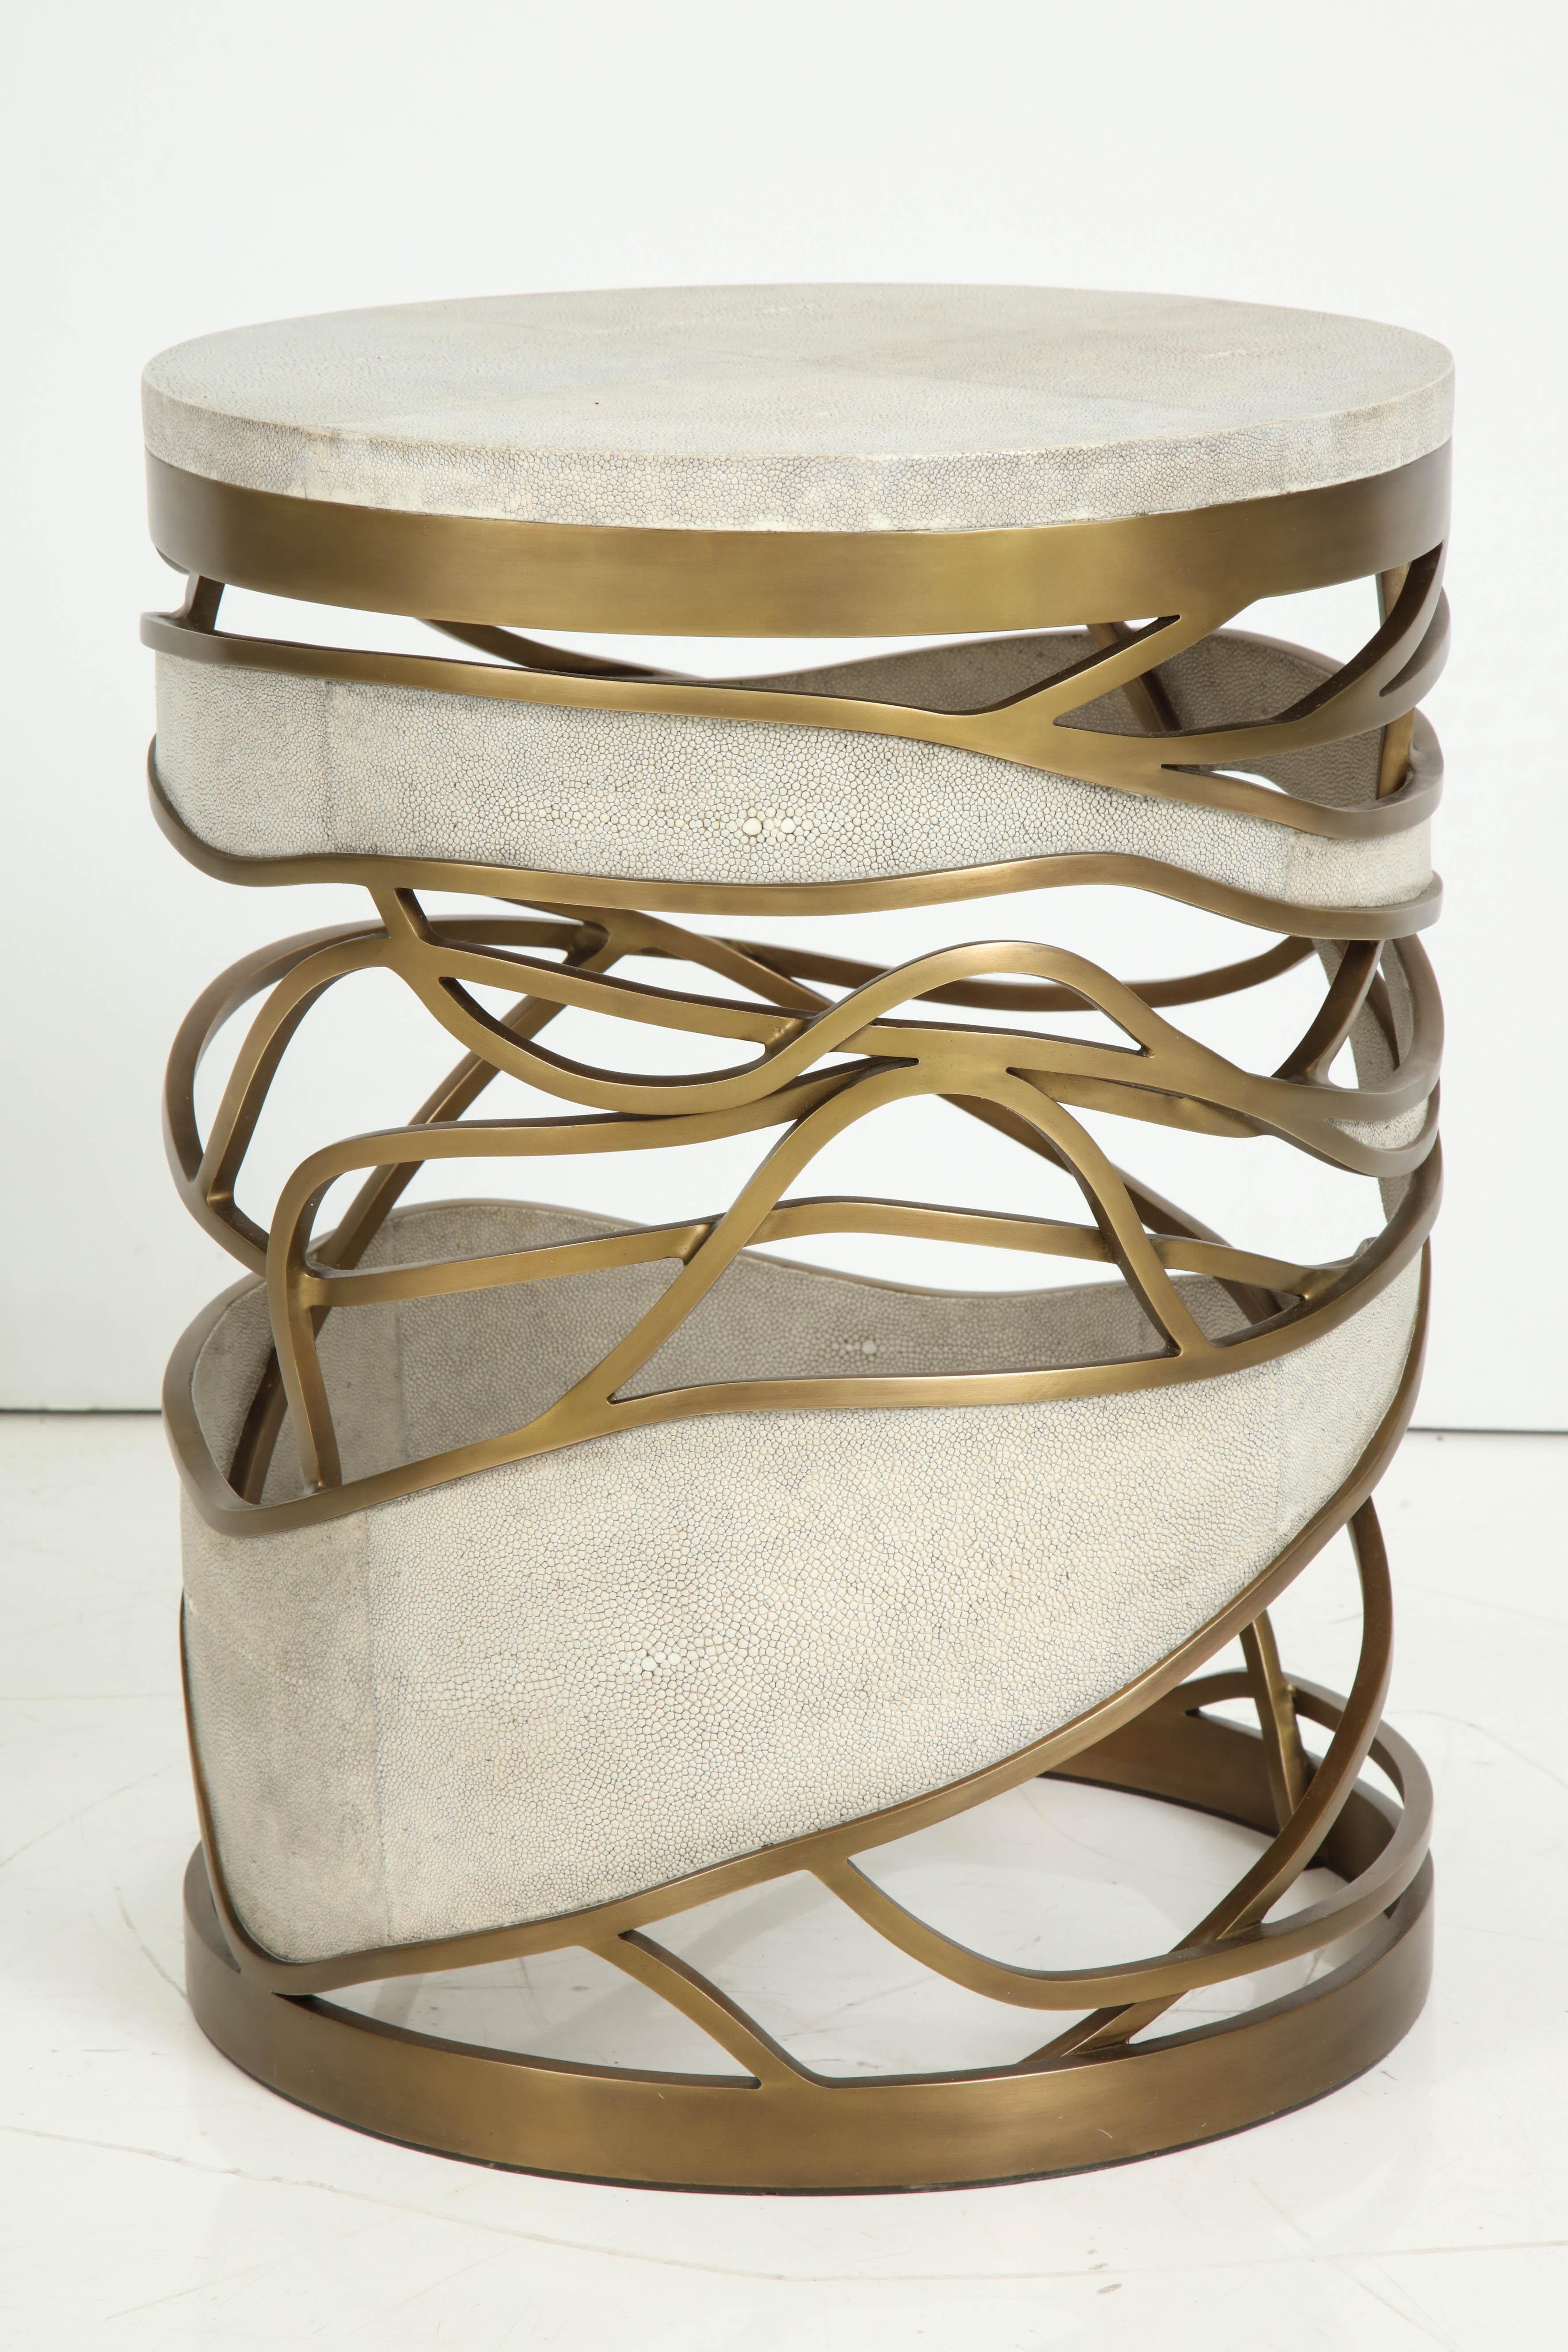 Hand-Crafted Shagreen Stool or Side Table with Brass Details, Contemporary, Cream Shagreen